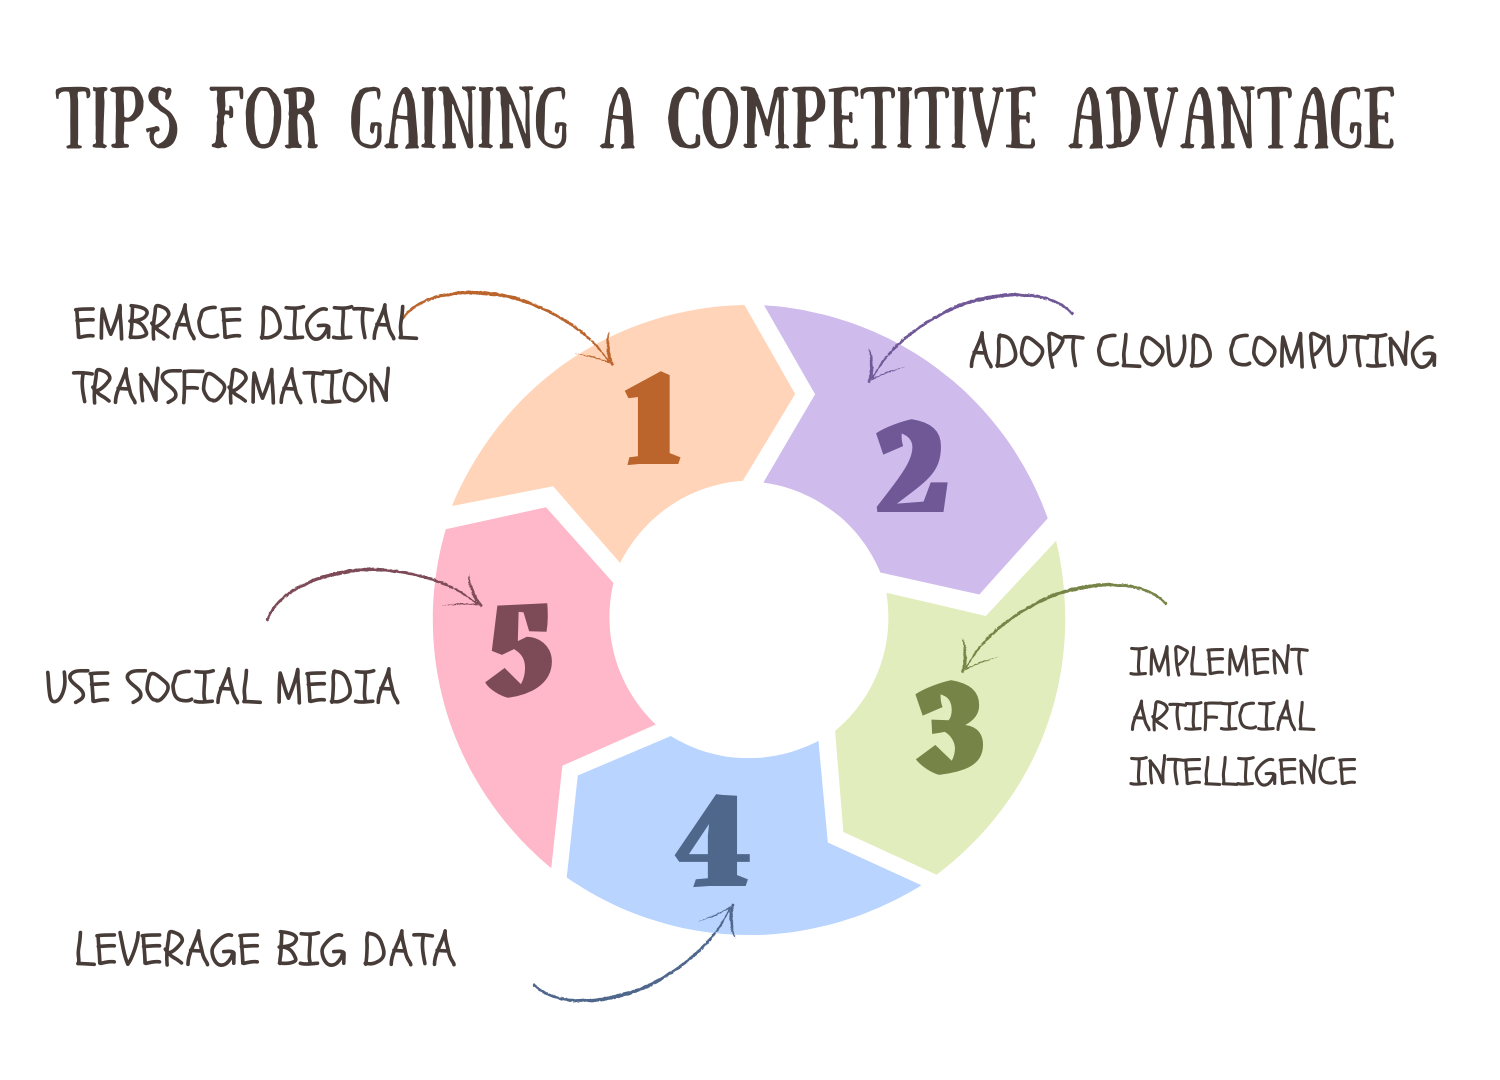 Tips for gaining competitive advantage